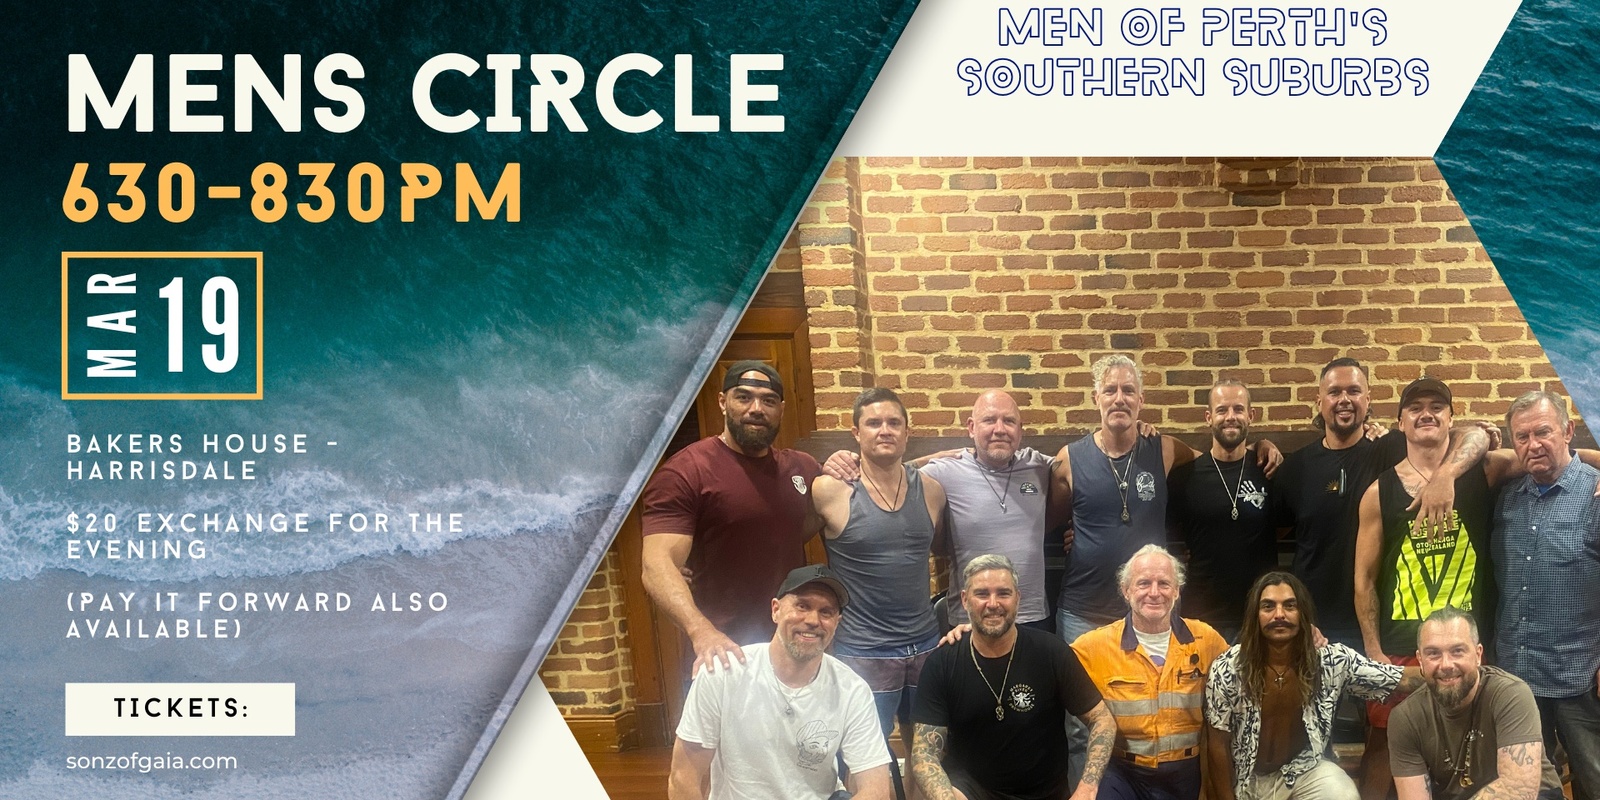 Banner image for Mens Circle: Perth's Southern Suburbs